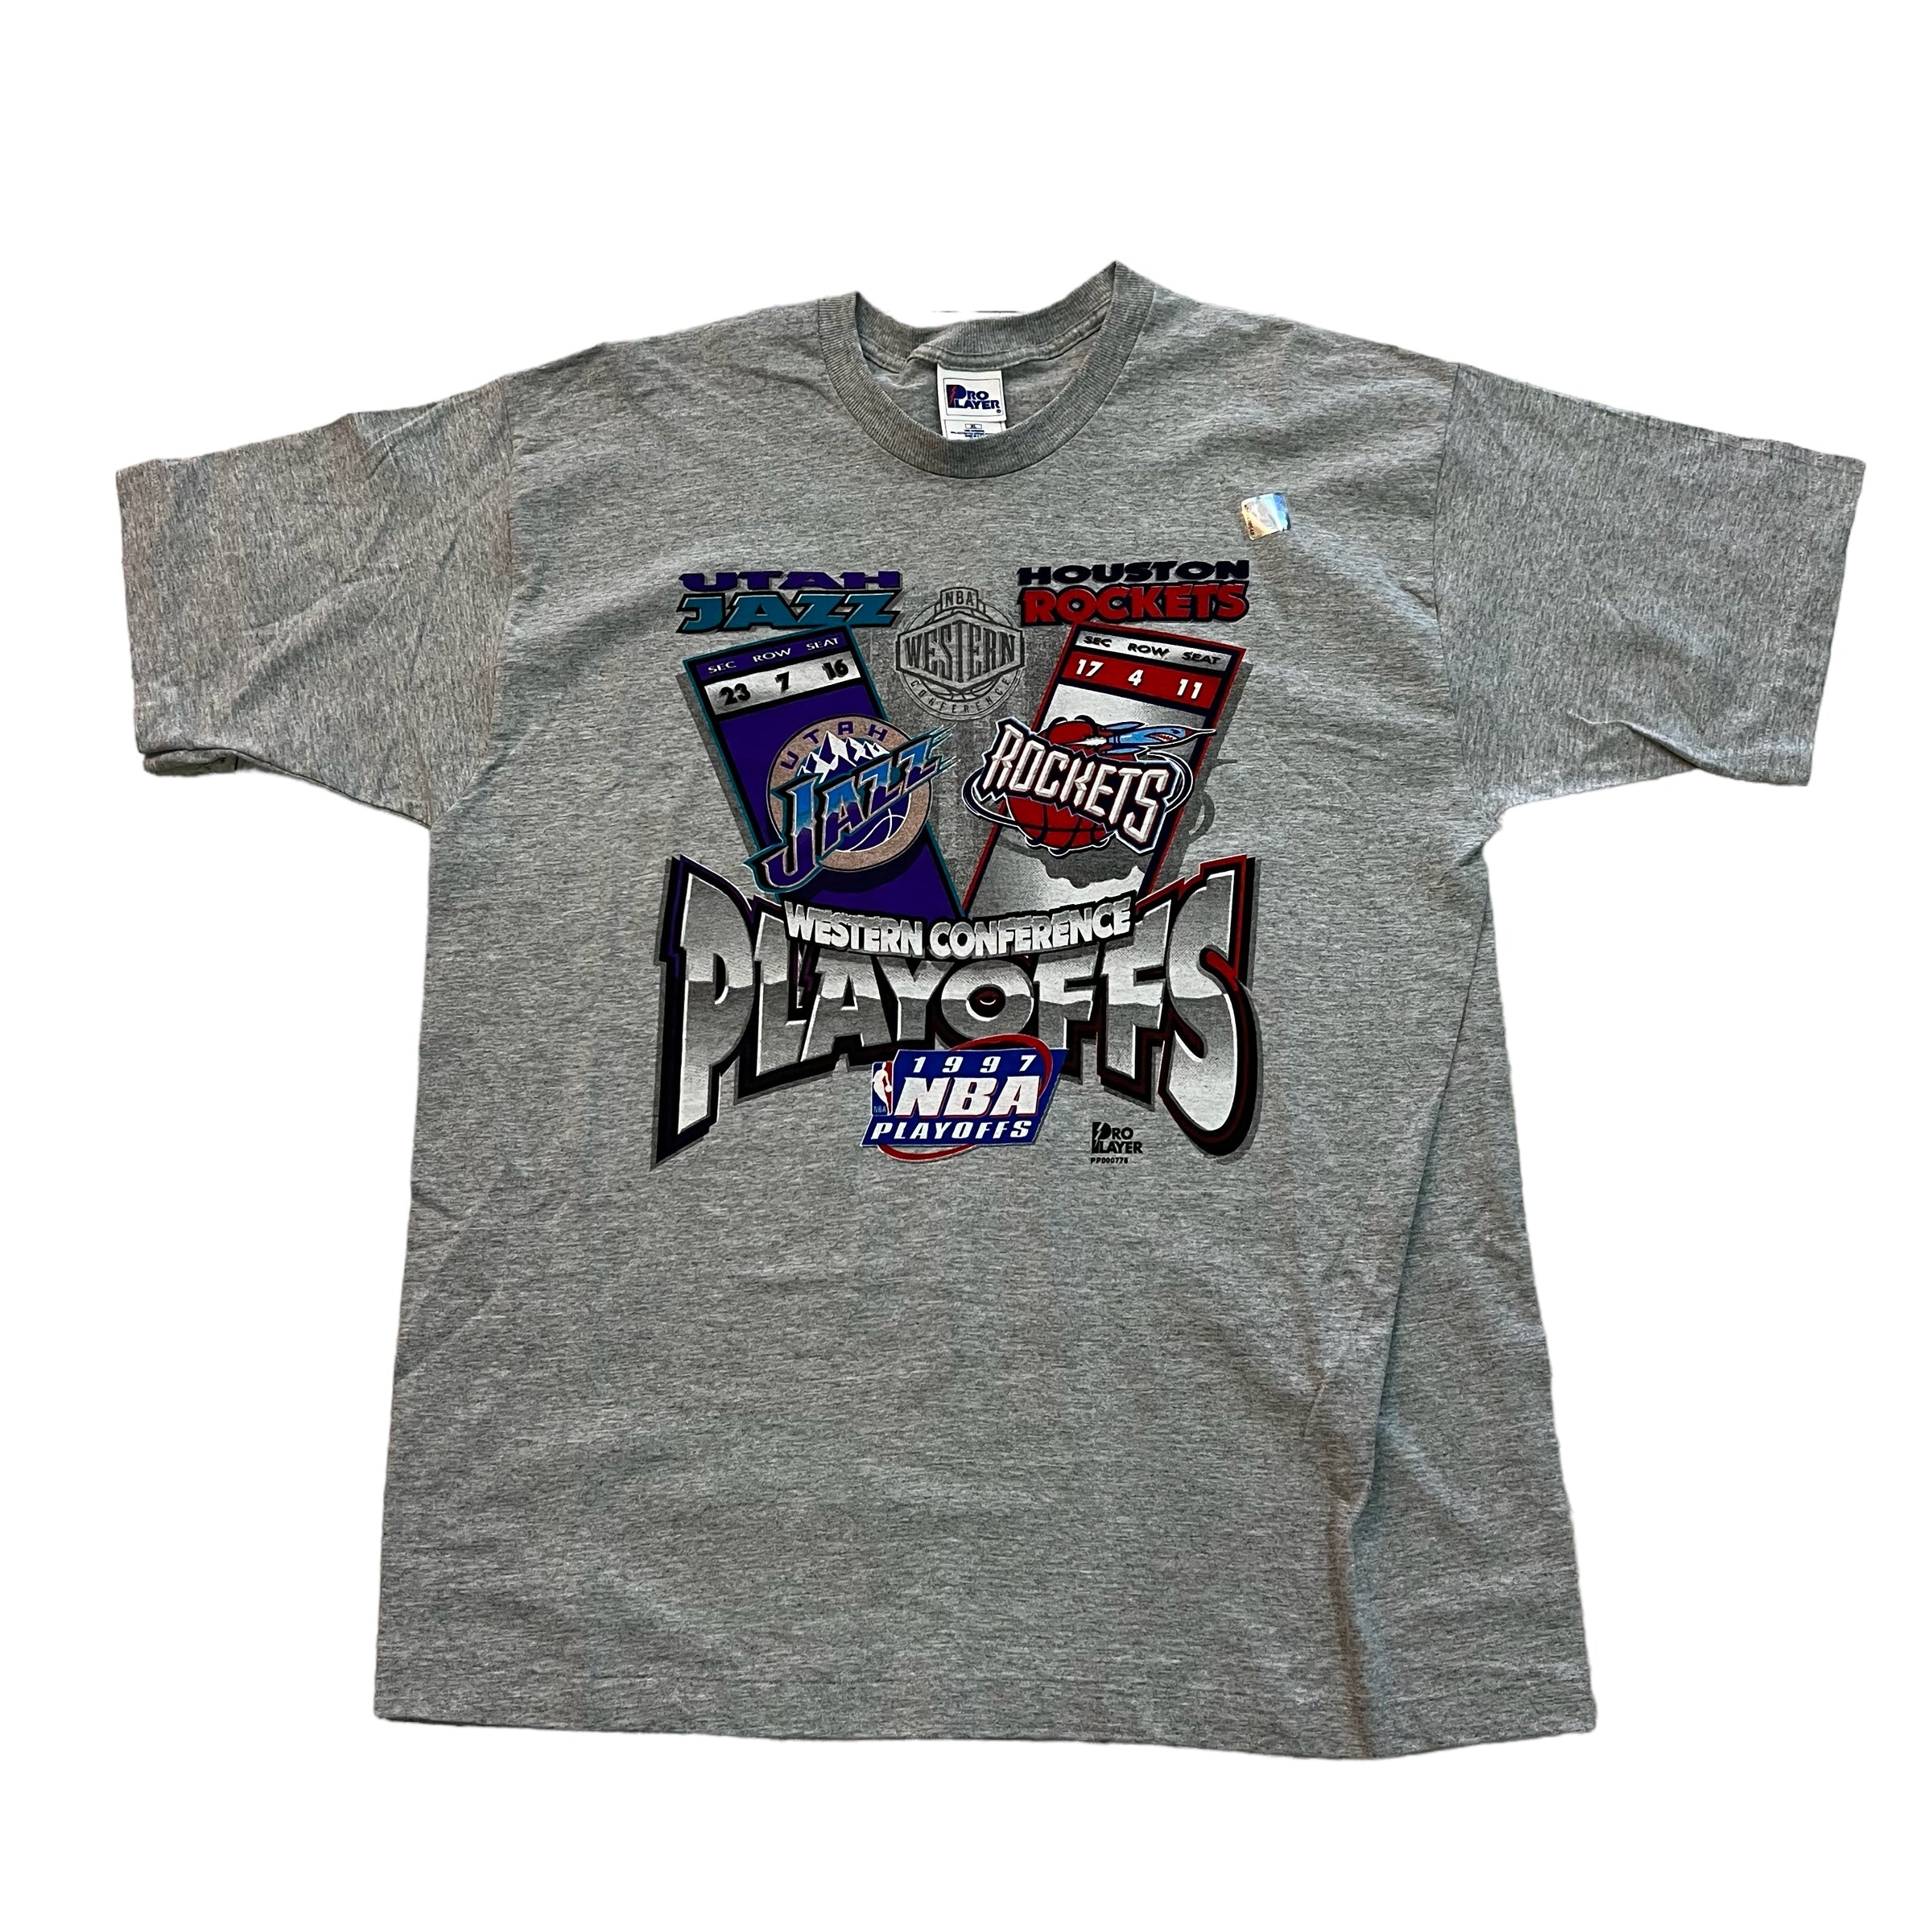 1997 WCF PRO PLAYER TEE (DSWT)